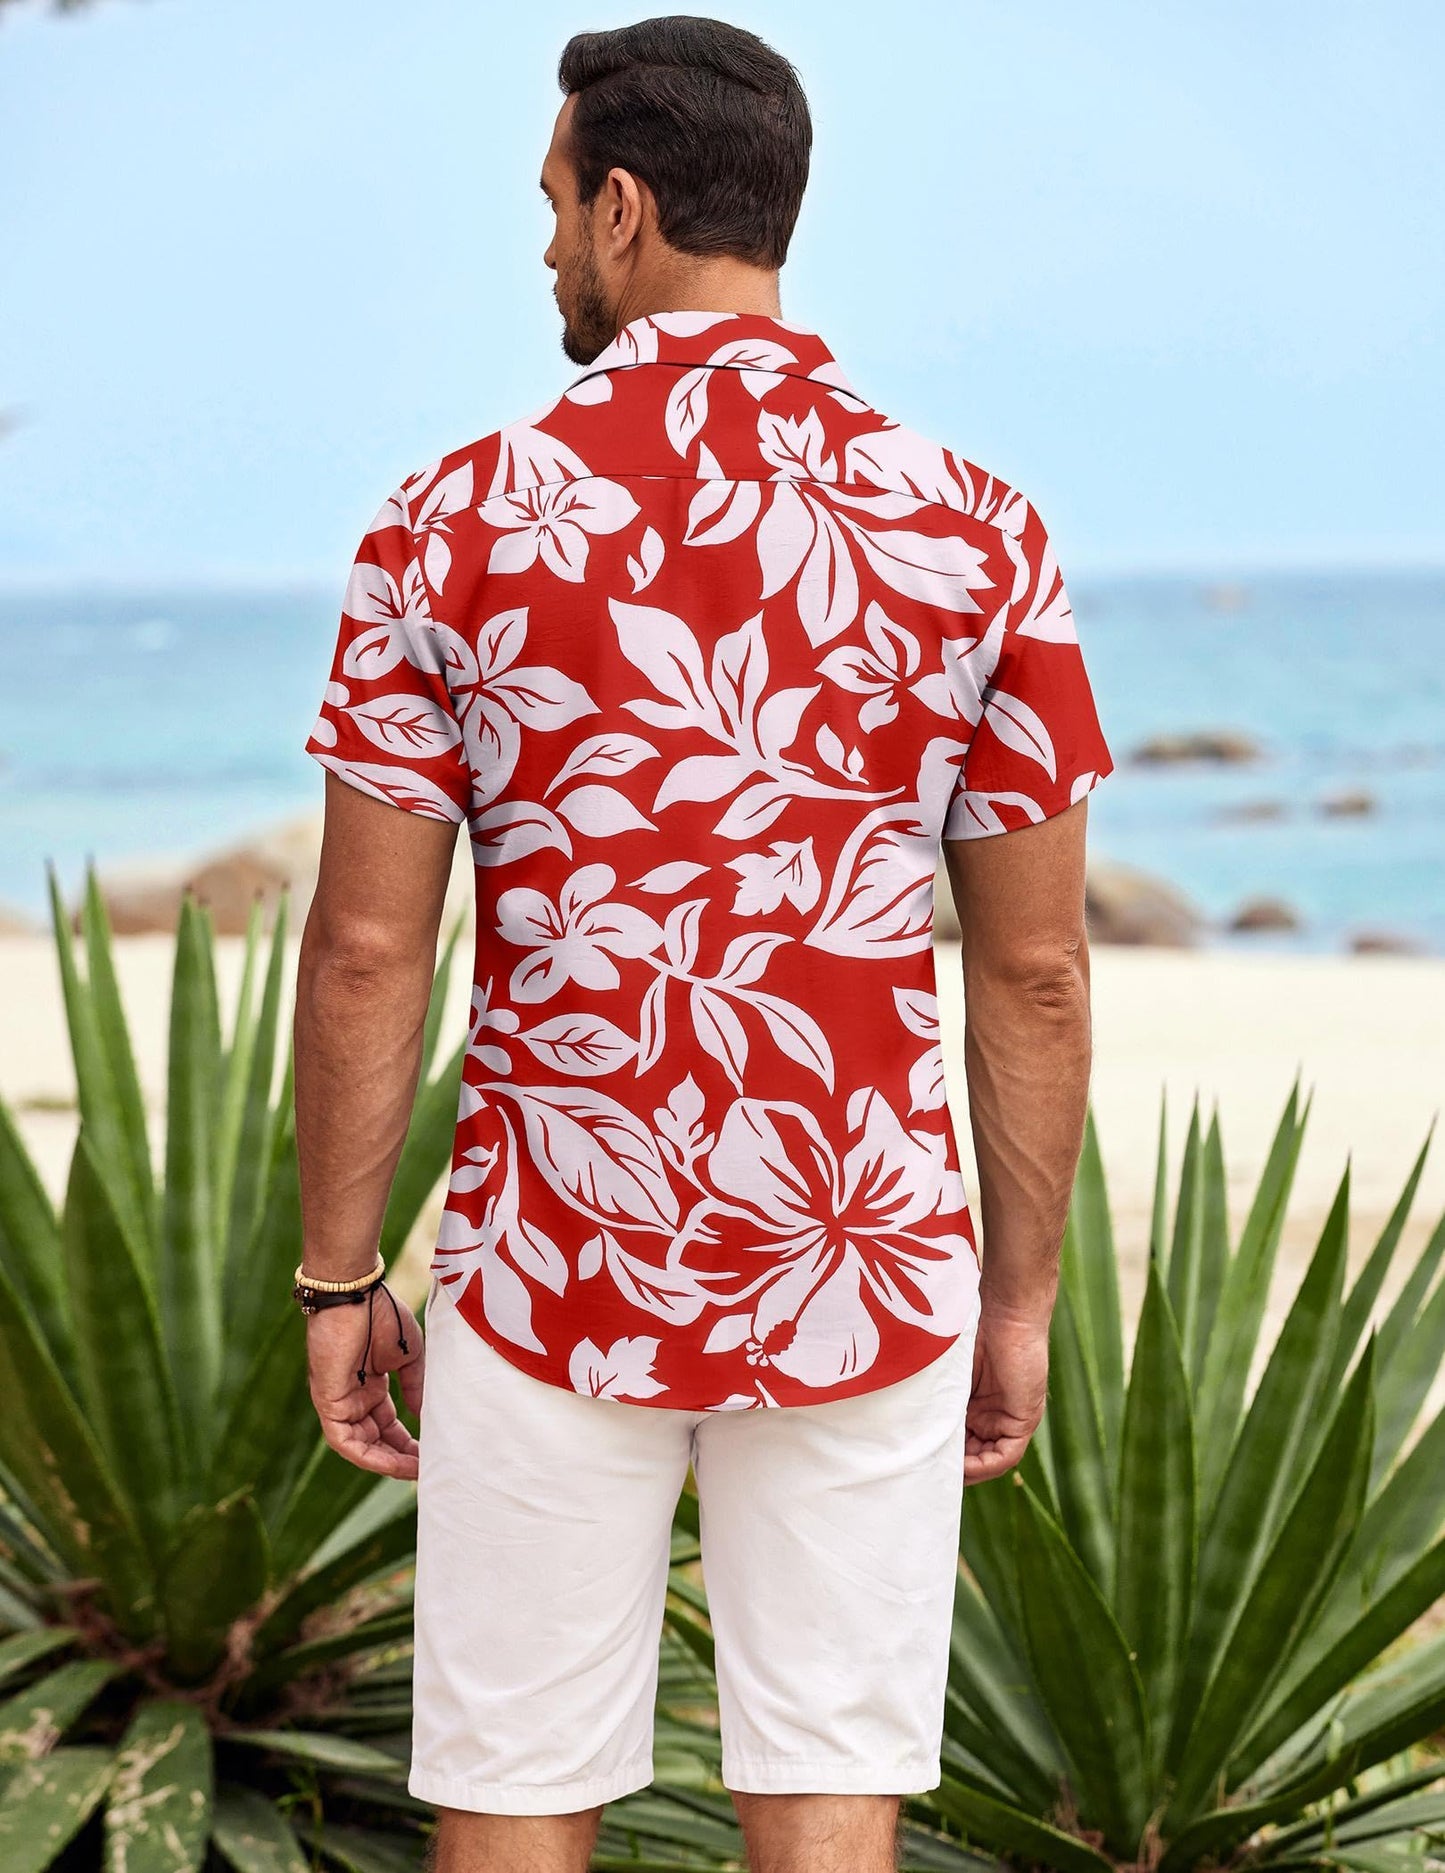 COOFANDY Hawaiian Shirt for Men Button Down Beach Shirts Wrinkle Free Vacation Shirts Bowling Shirts Red-White Floral